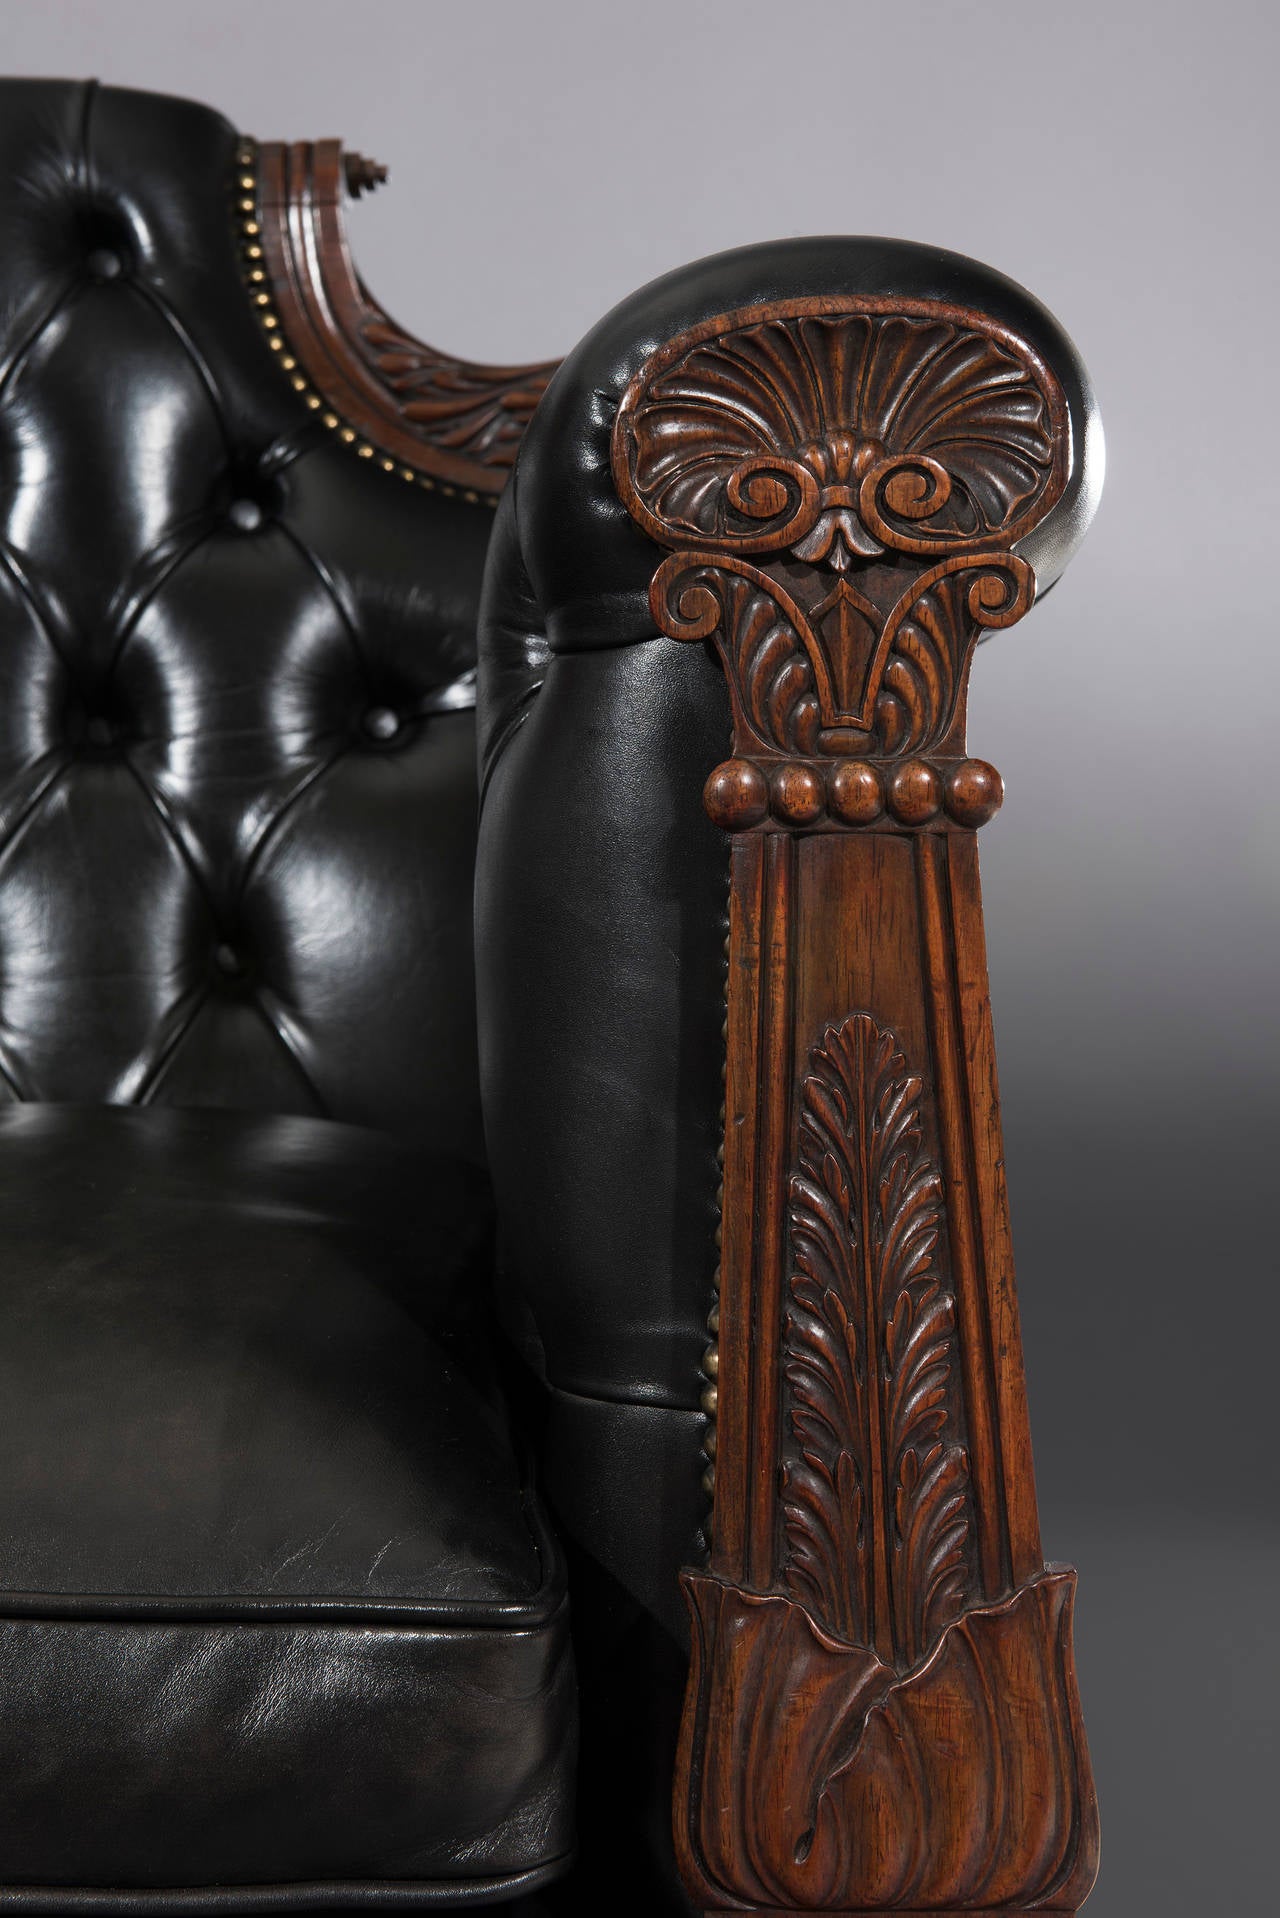 This stunning Regency period double-ended settee with a deep buttoned black leather finish and three removable cushions has crisply carved leaf decoration and turned scrolled ears to the back. The front arm supports are carved with acanthus and